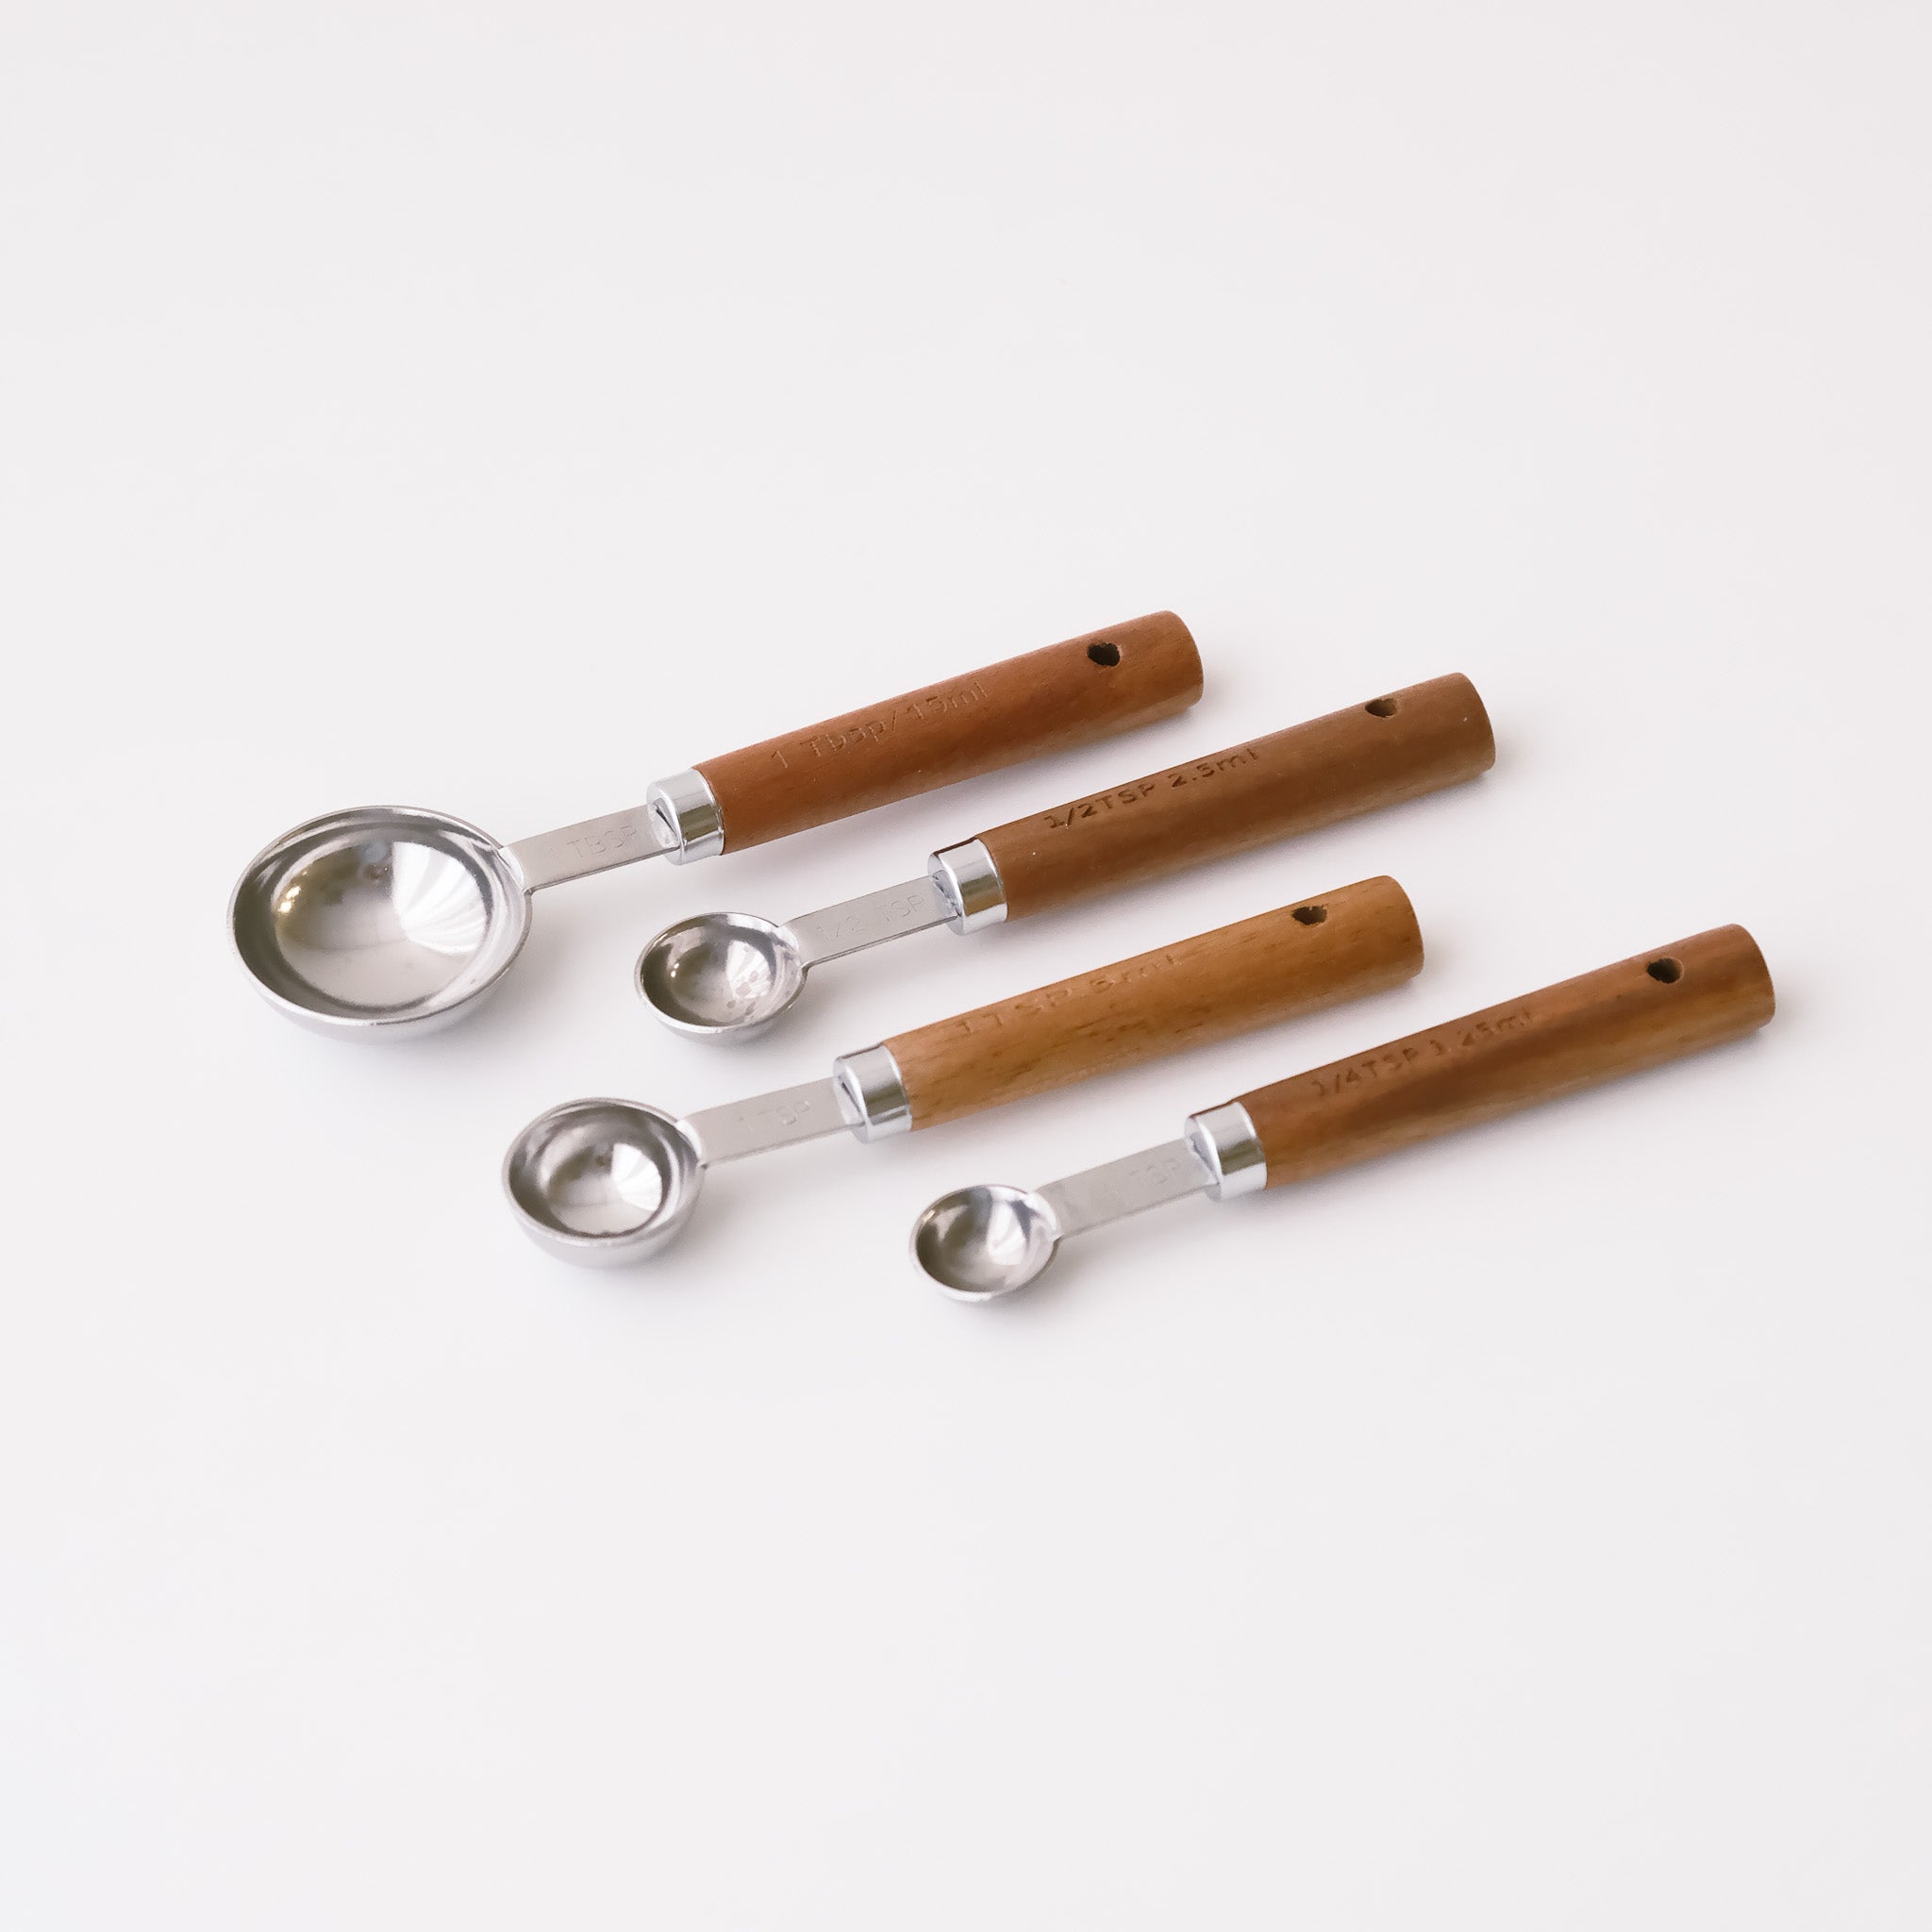 Silver Stainless Steel Measuring Cups & Spoons